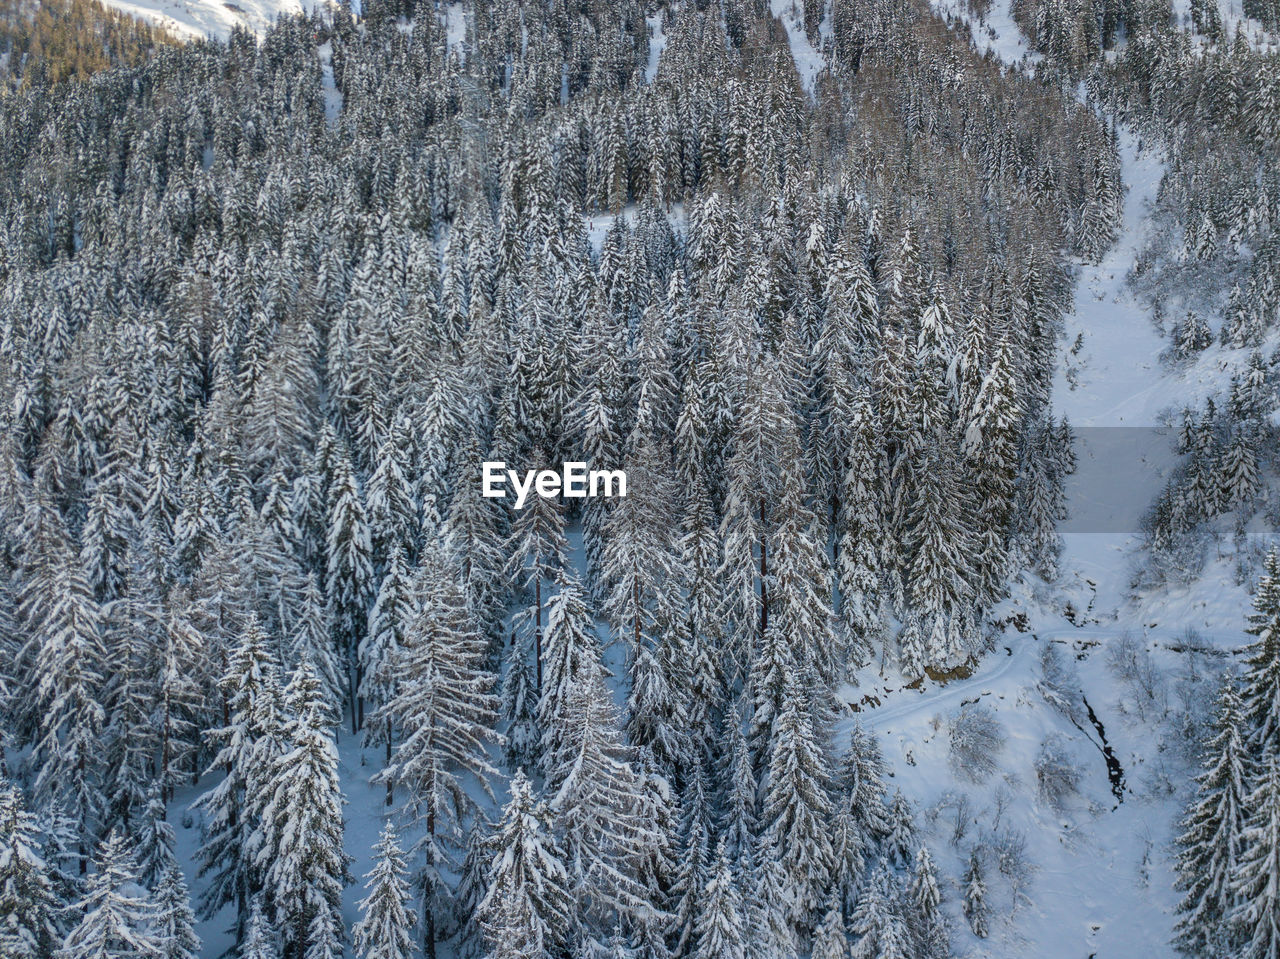 HIGH ANGLE VIEW OF SNOW COVERED TREES